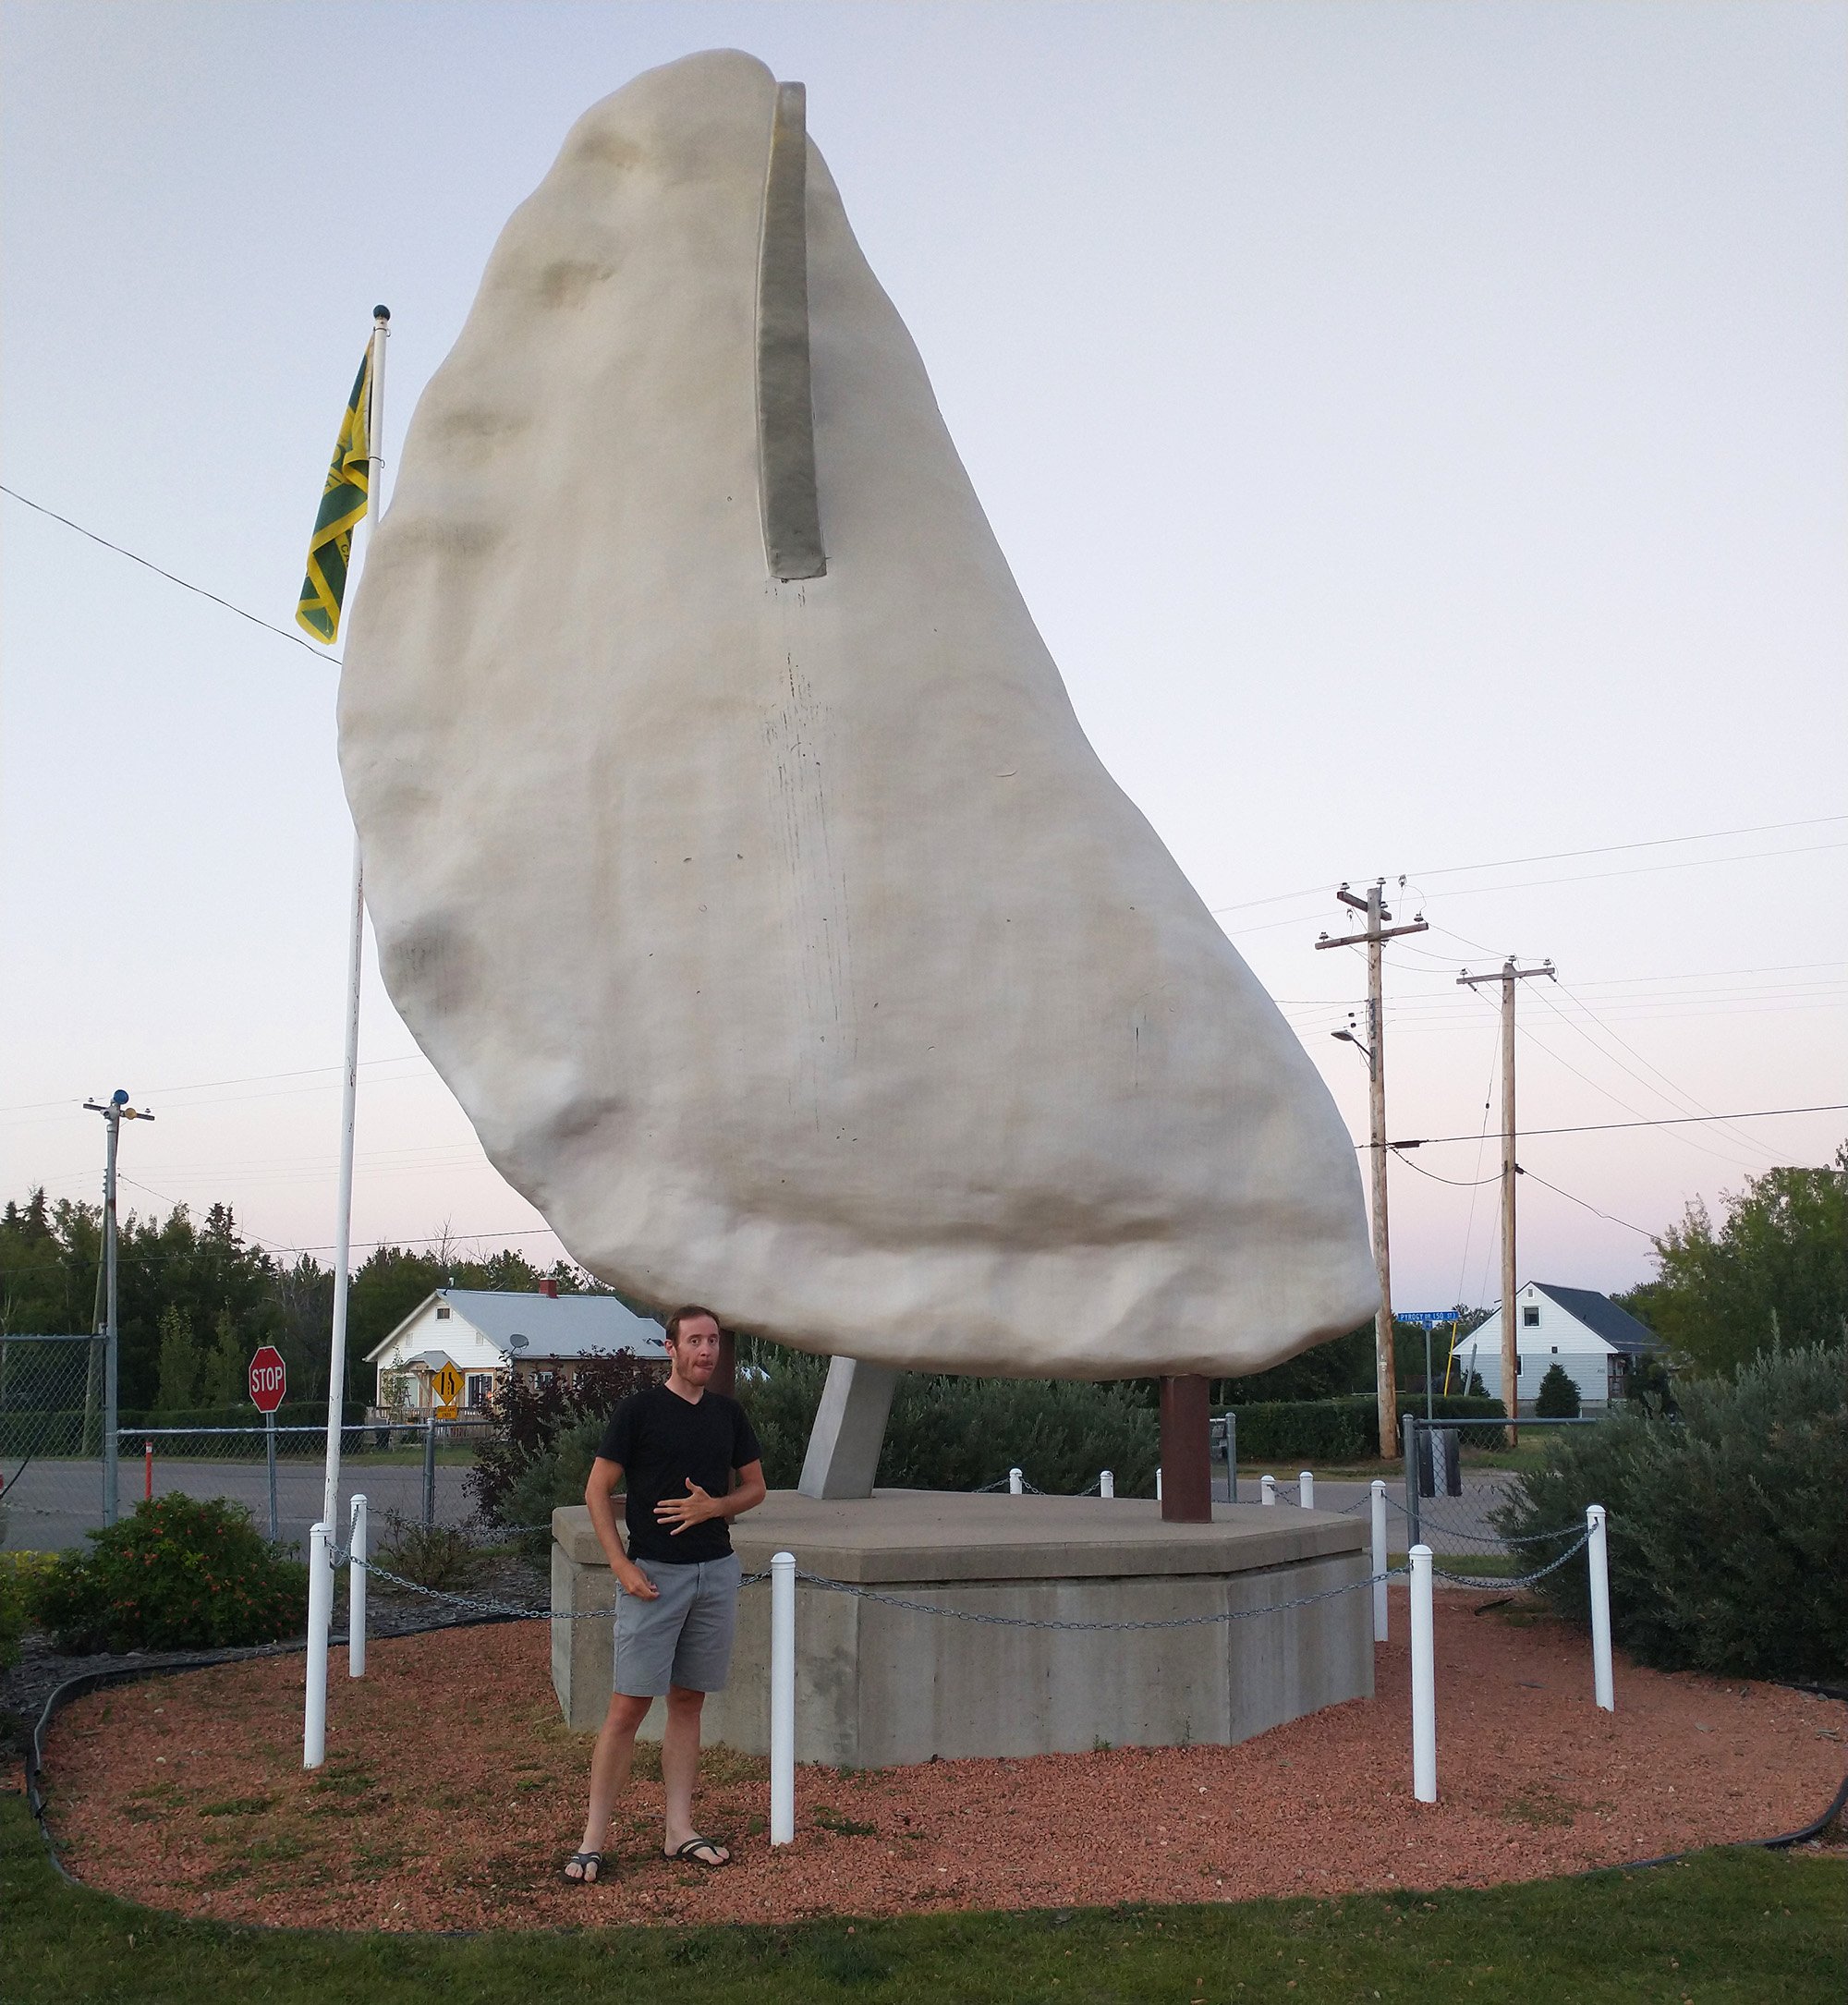 Last one, as the sun was starting to set: The Largest Perogy! Lot of Polish/ Ukrainian heritage around Alberta apparently.